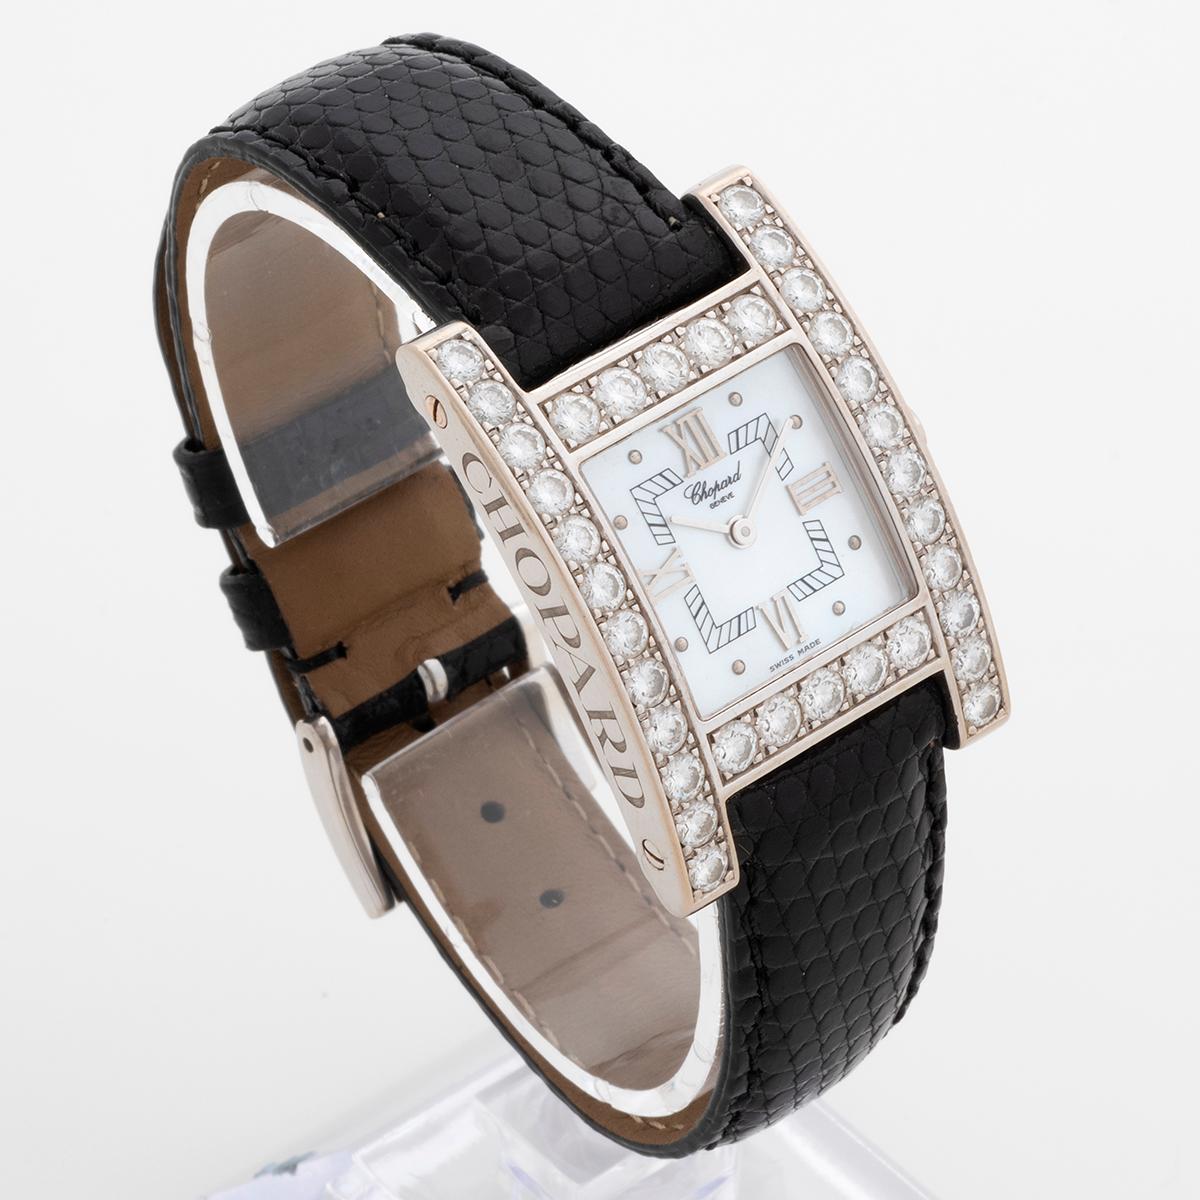 Our stunning Chopard H Diamonds ladies dress watch, reference 13 / 6621, features a 18k white gold case and mother of pearl dial, factory set with 24 diamonds totalling 2.99ct. Presented in excellent condition with light signs of use, we have fitted